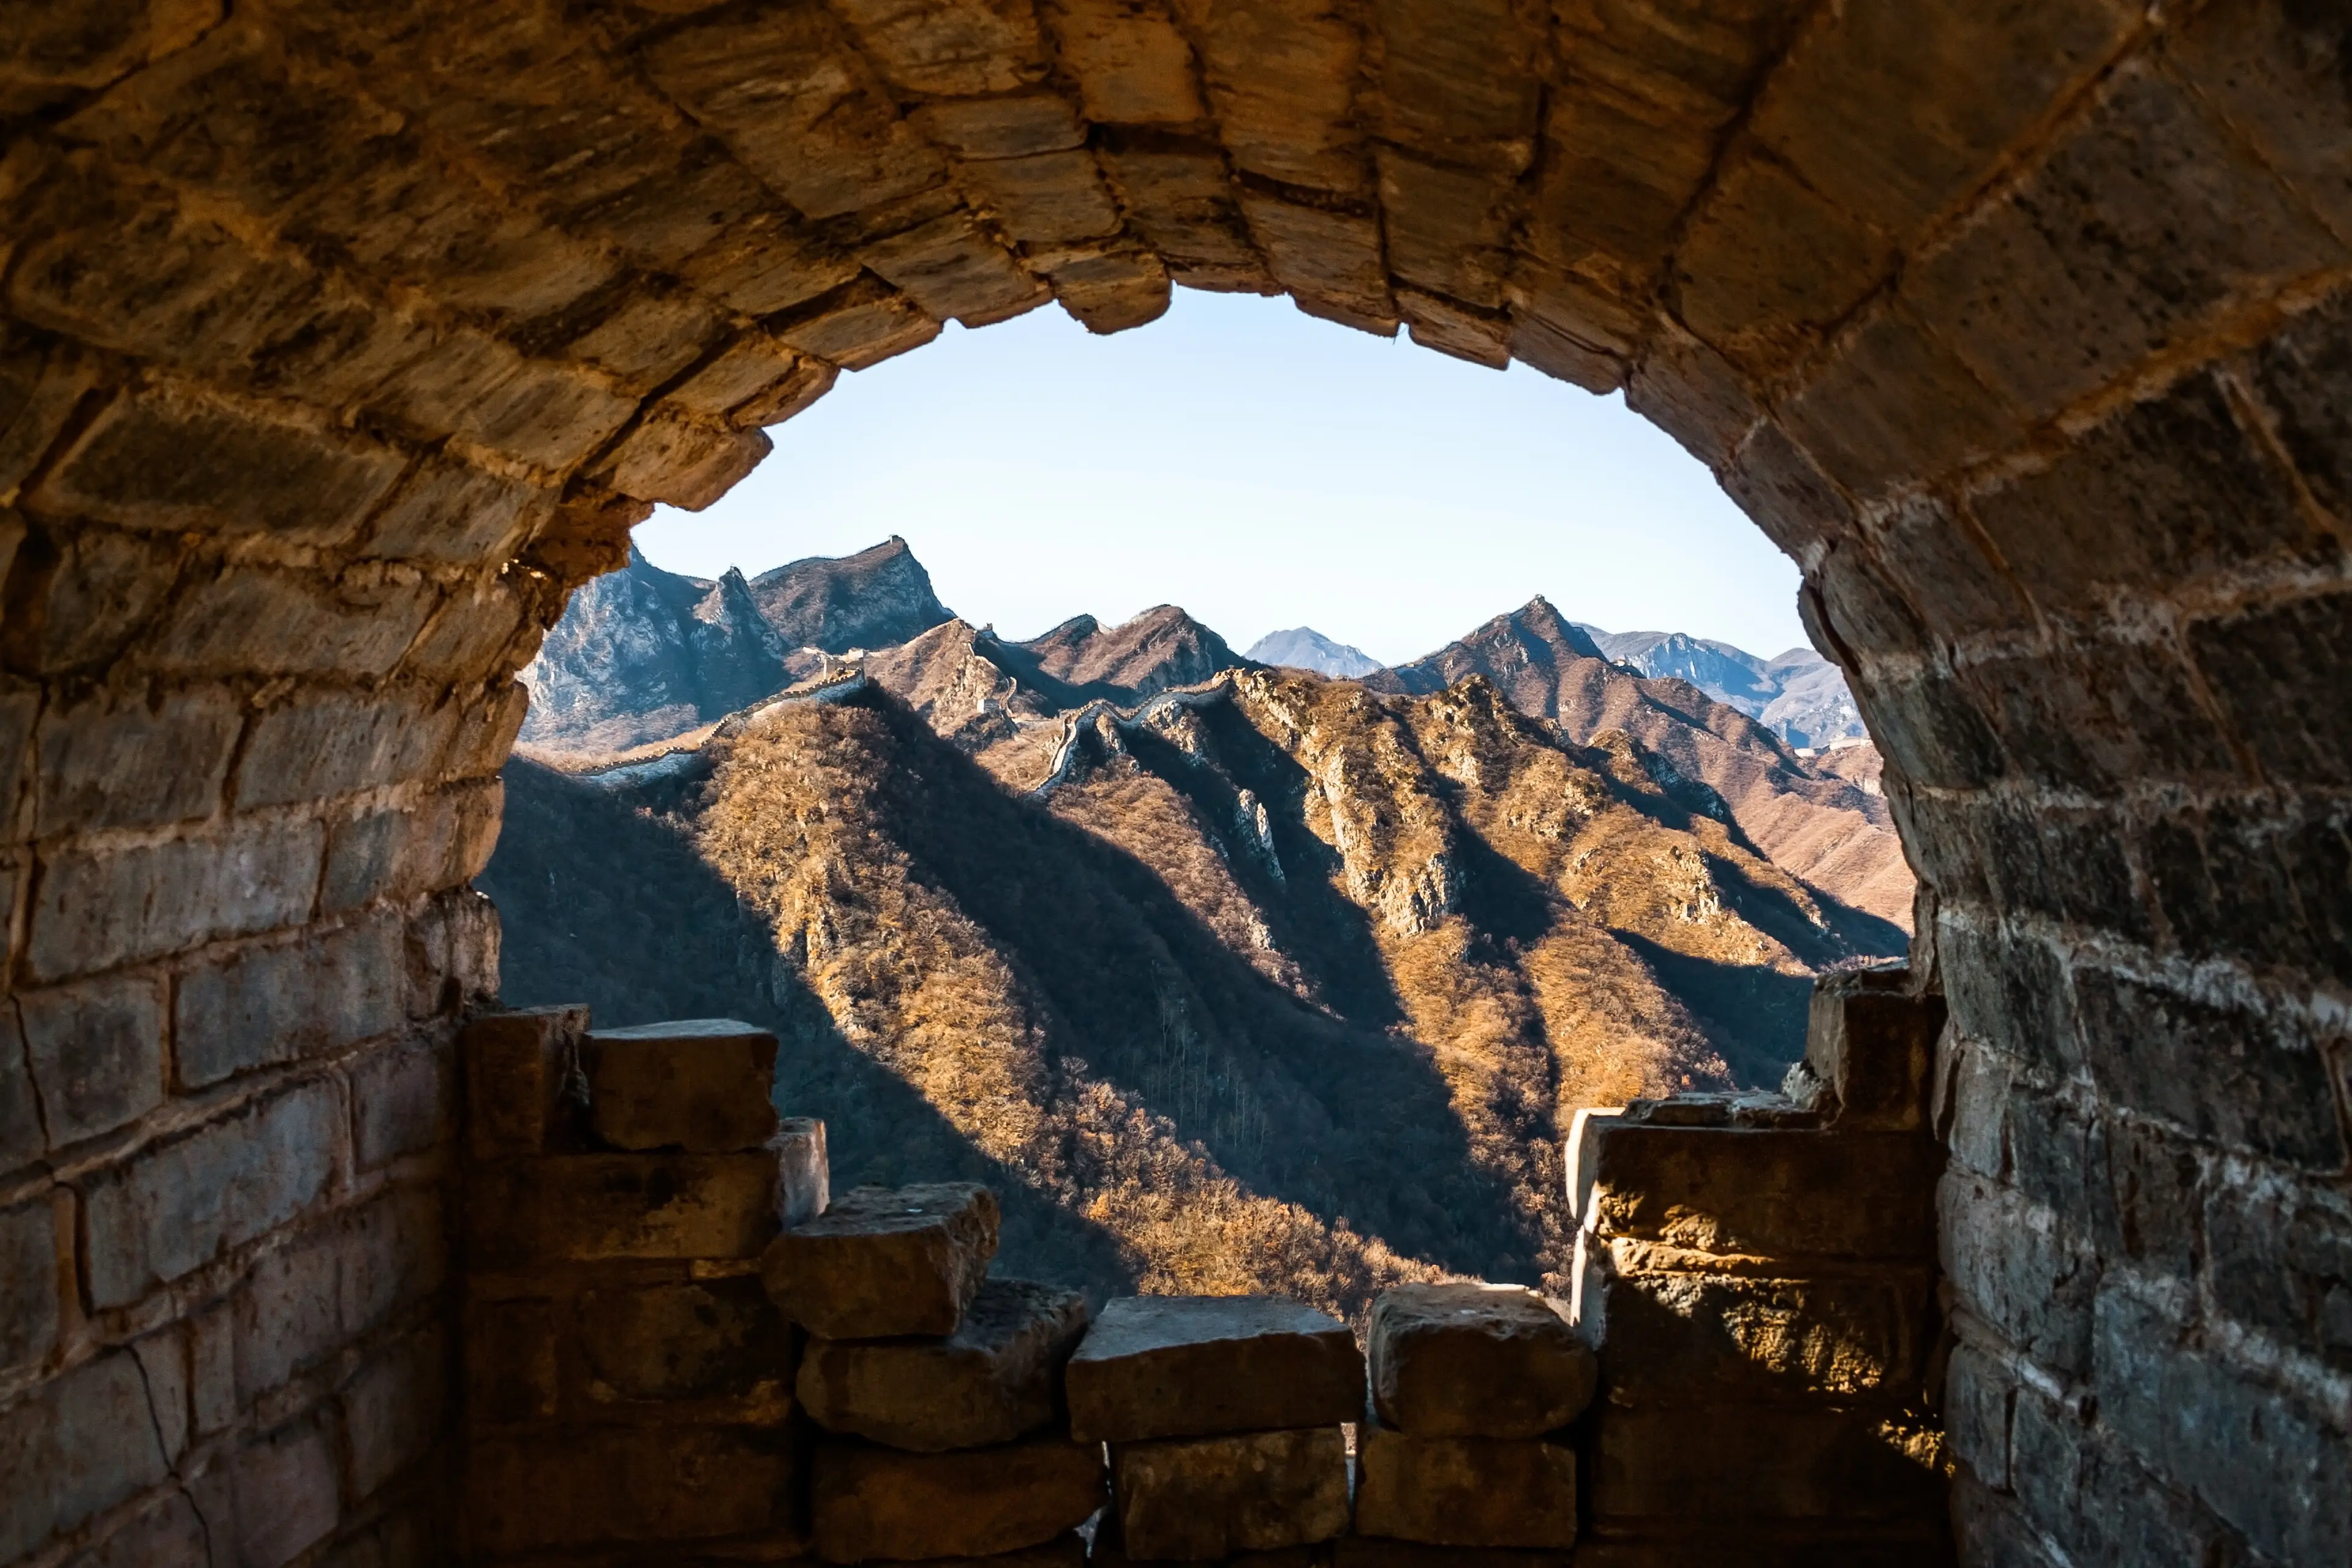 1-Day Solo Adventure: Outdoor Activities at The Great Wall of China